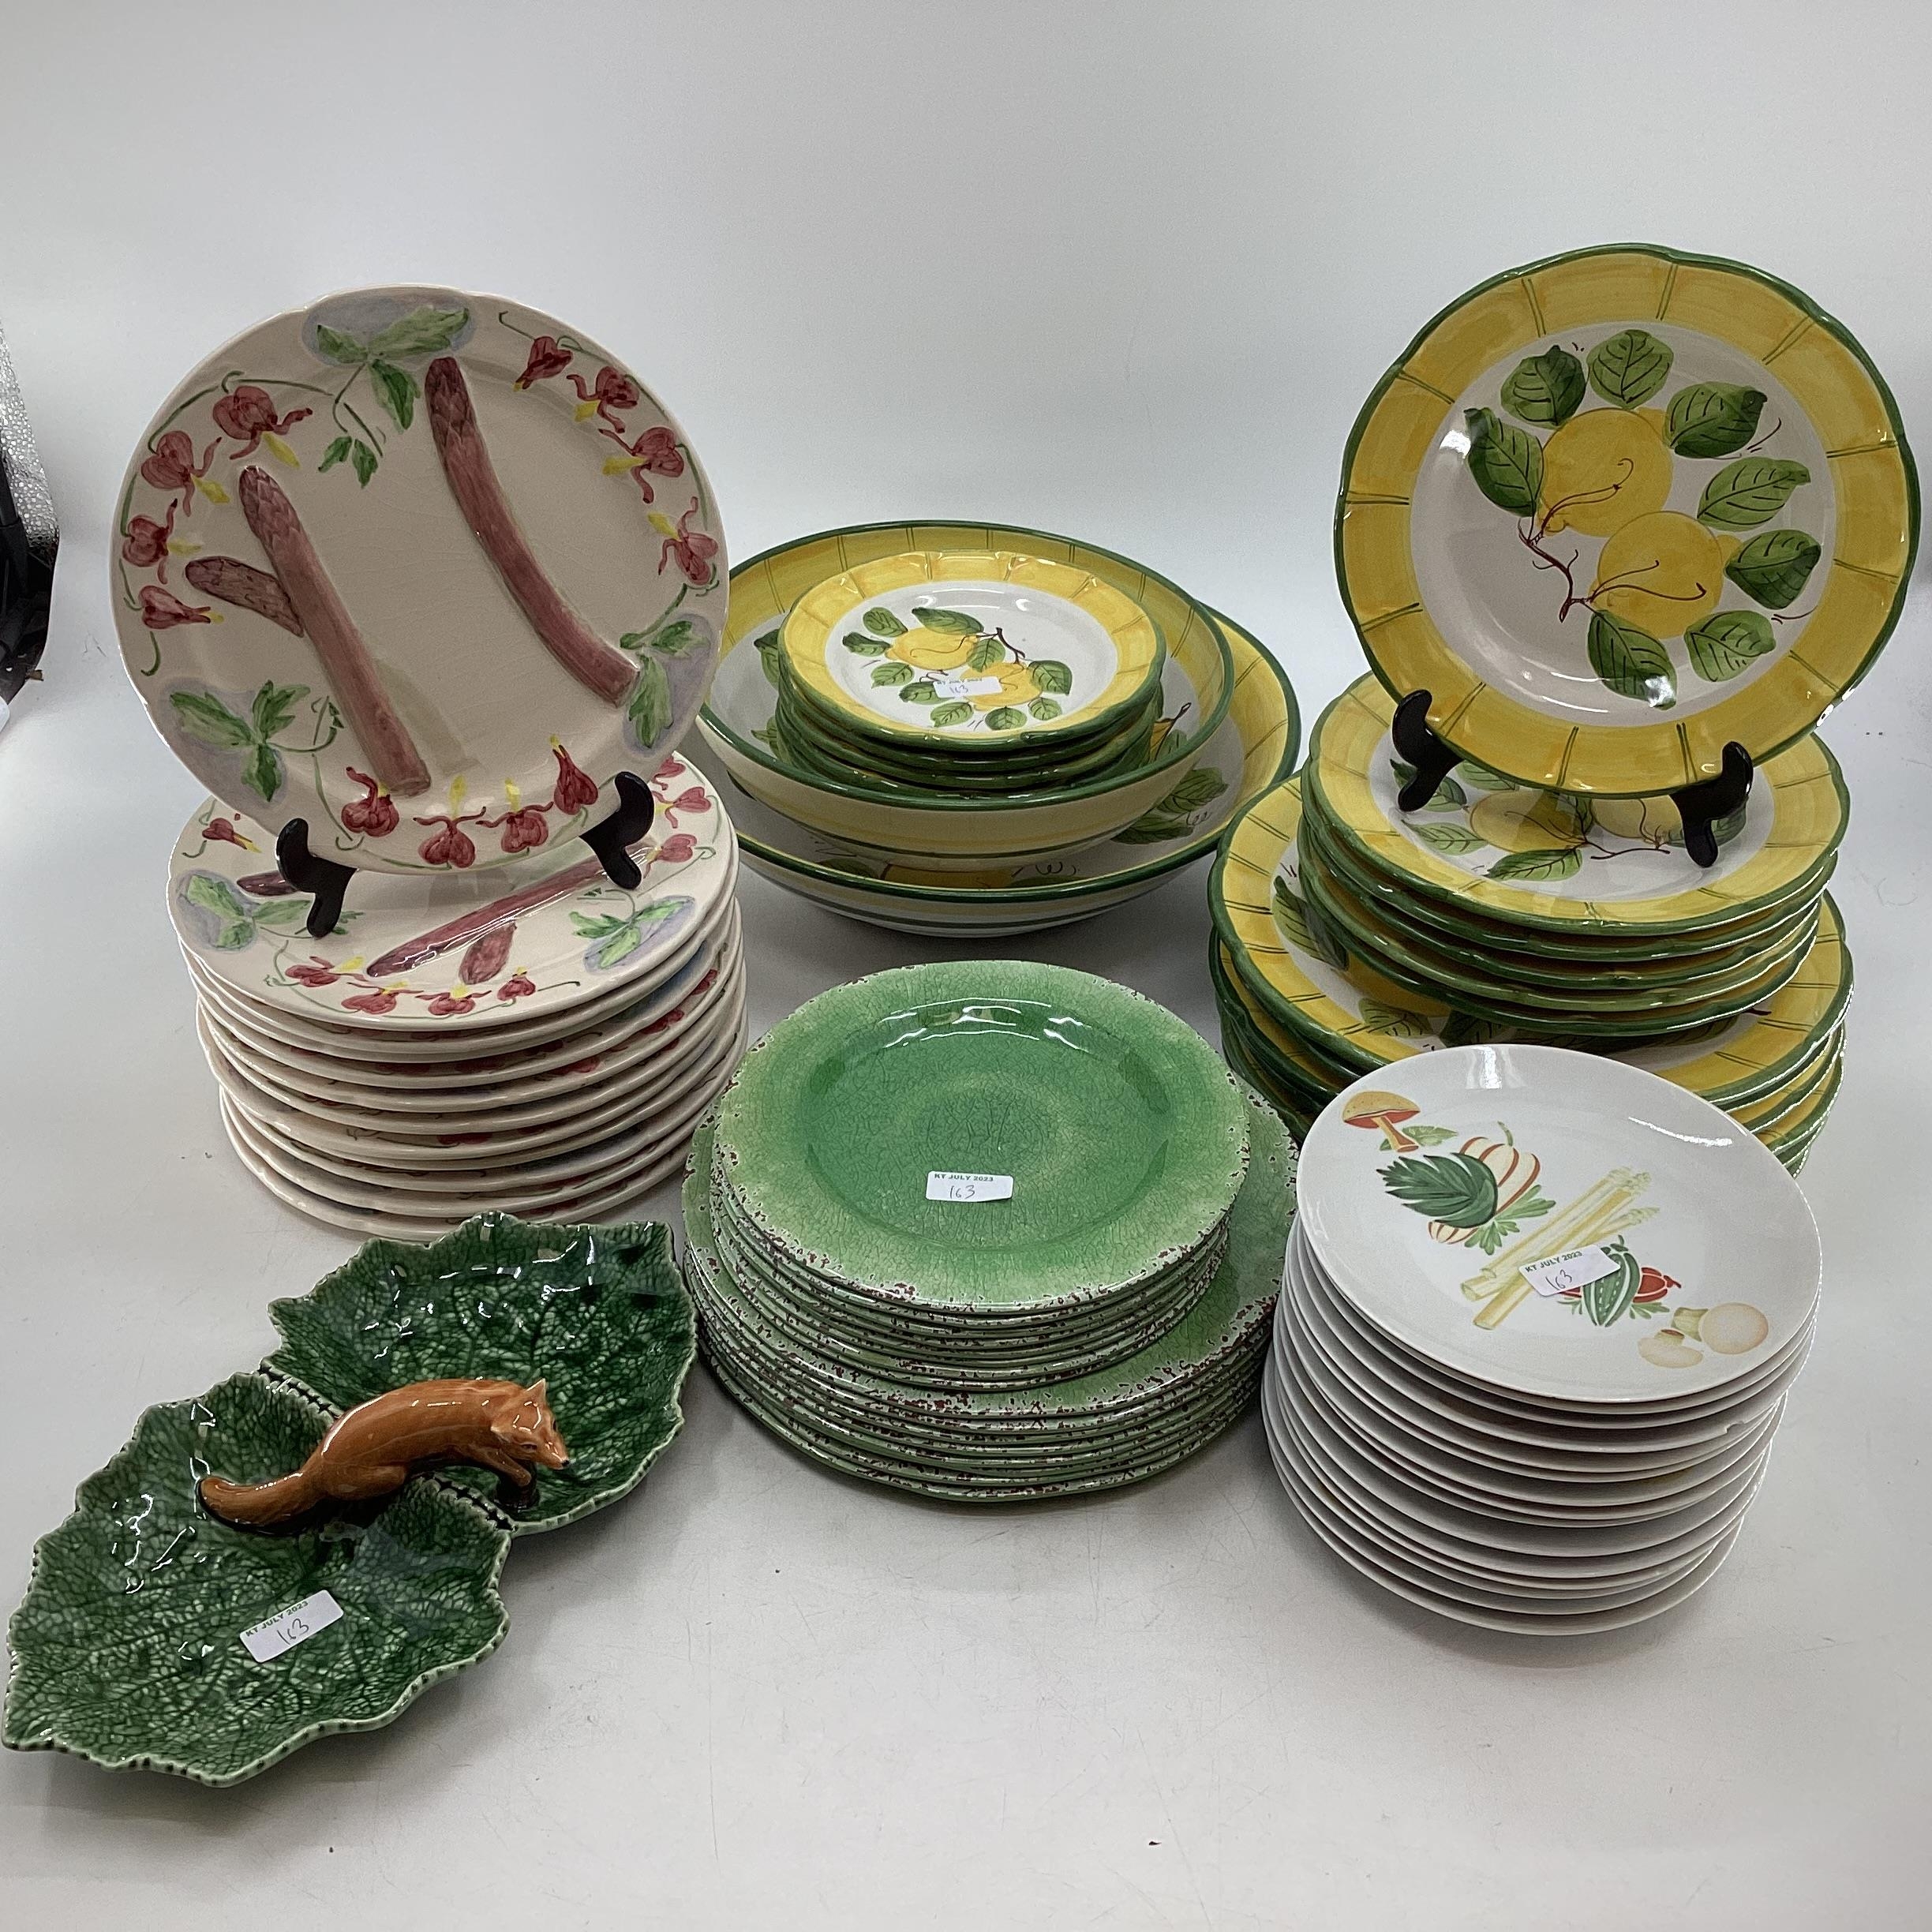 A collection of 20th century ceramics to include an extensive La Tartana Positano part service